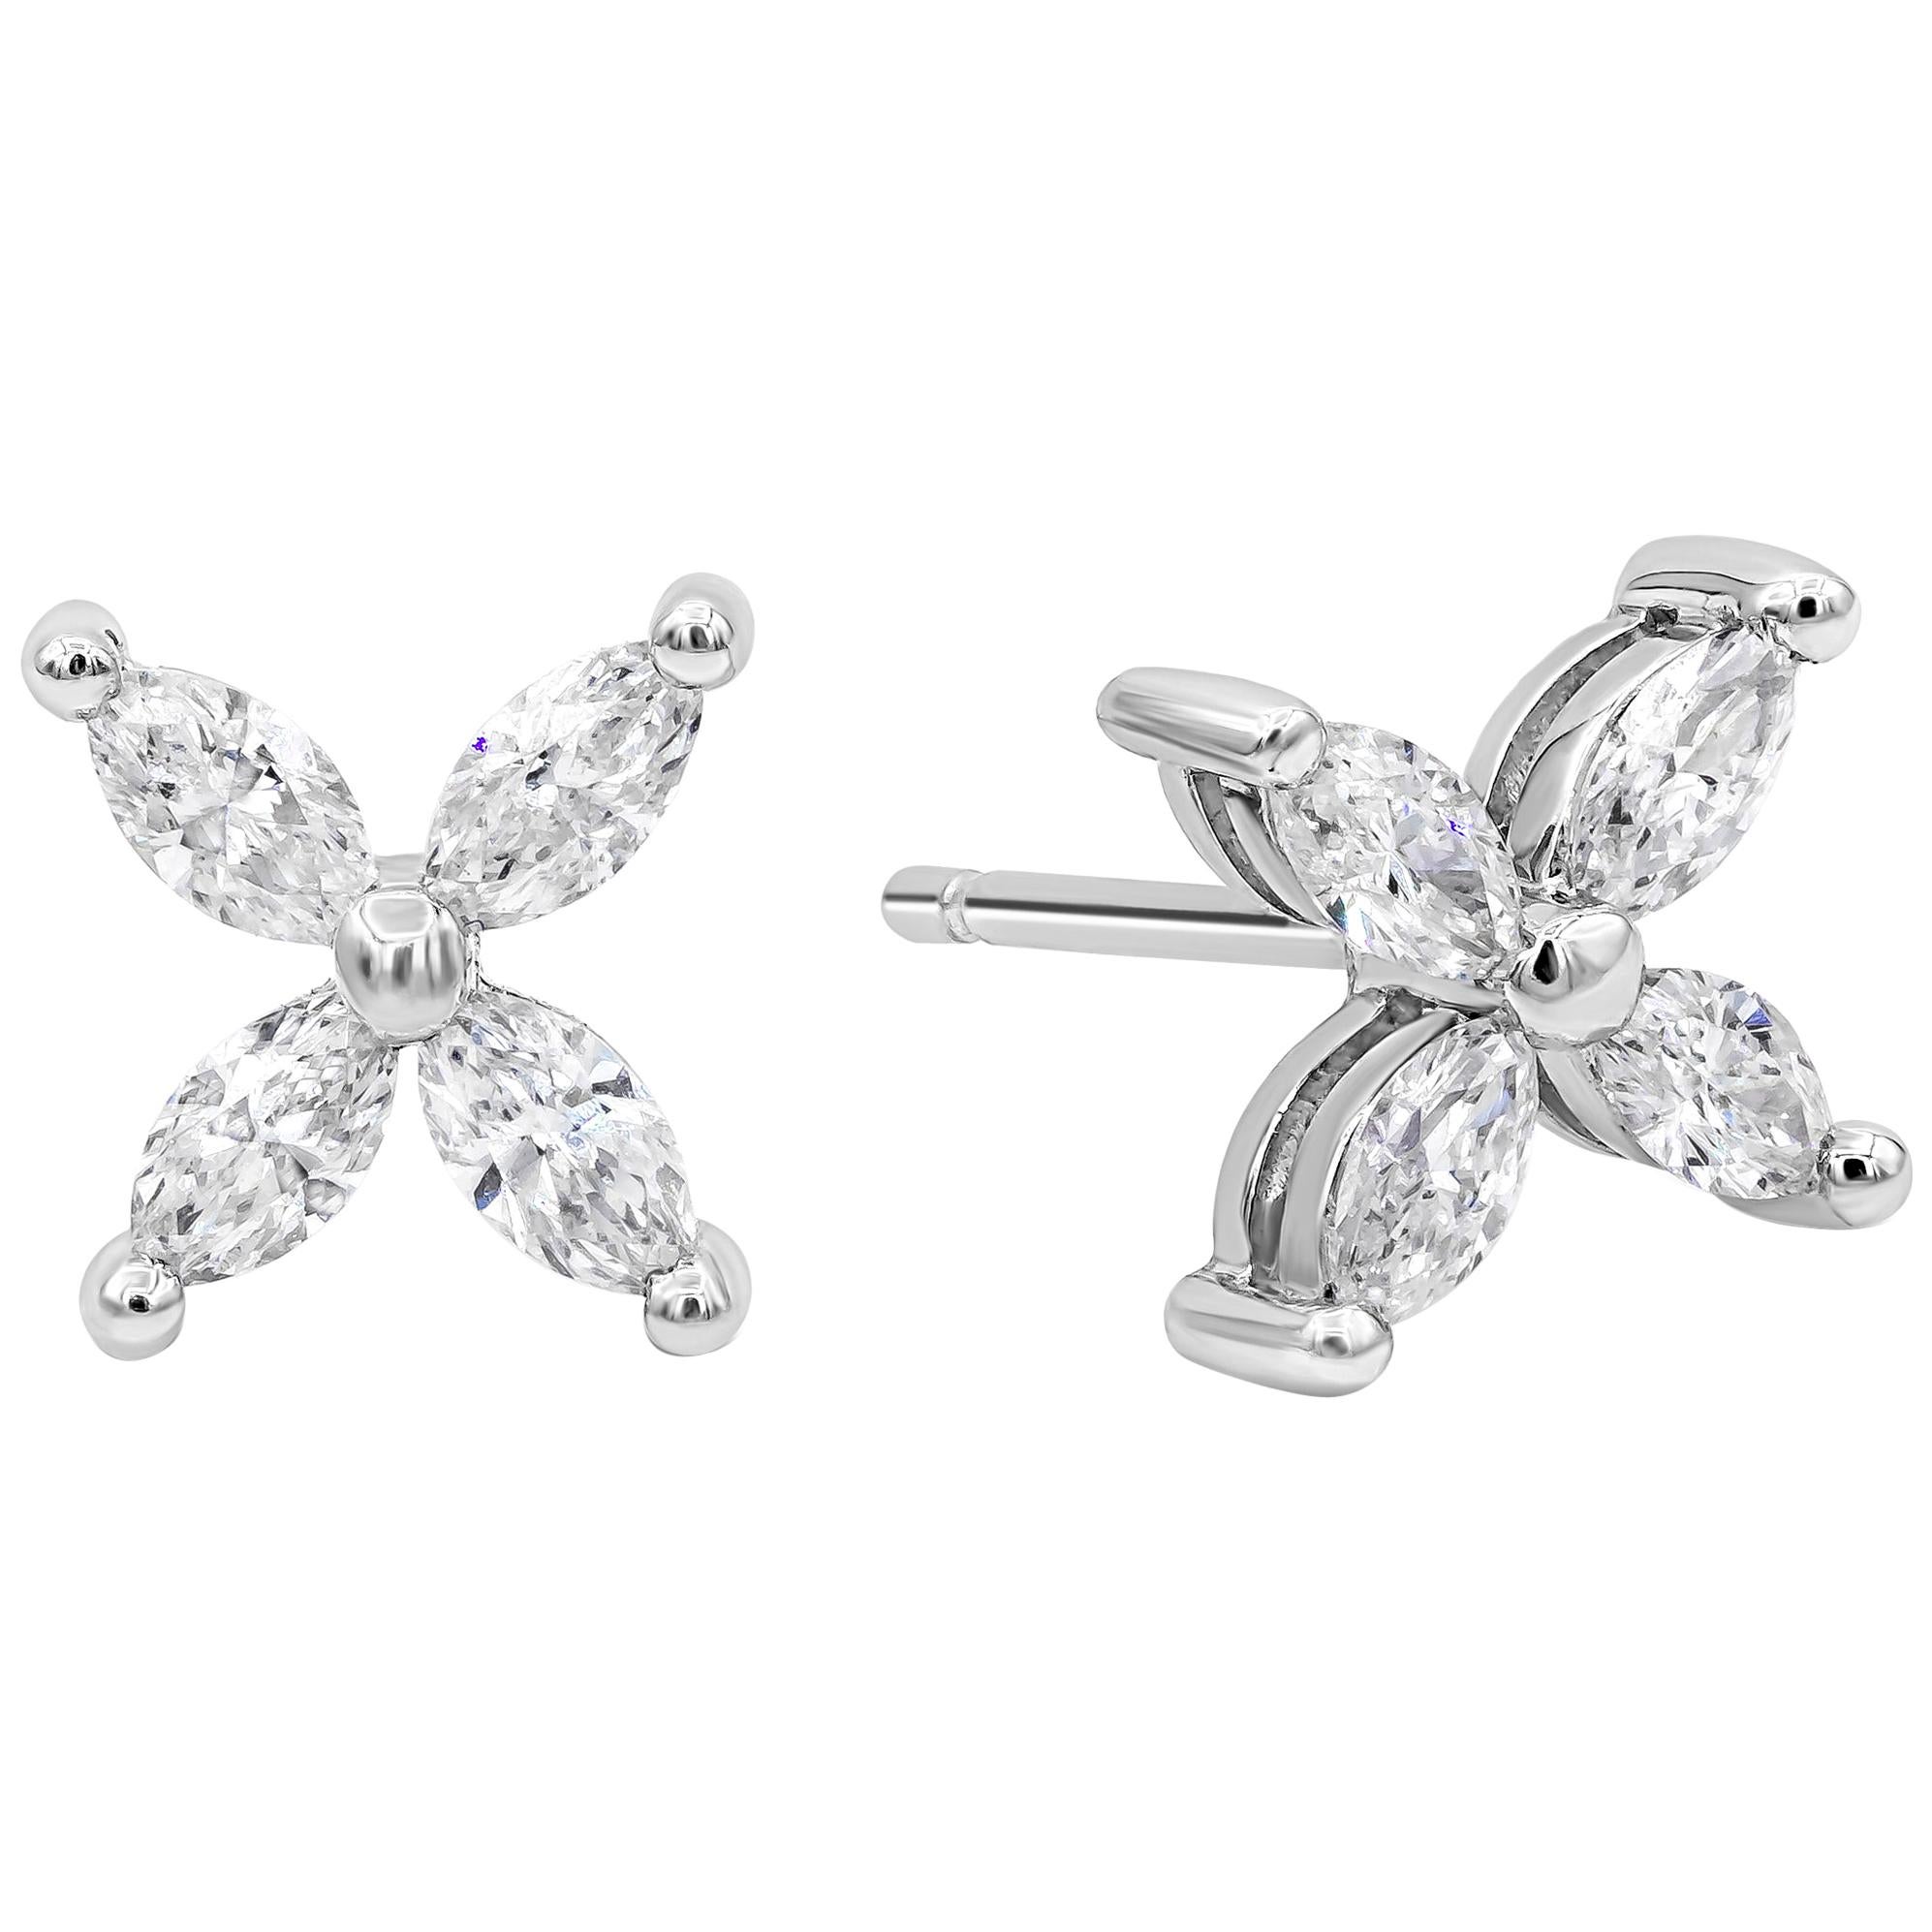 Unique style earrings showcasing marquise cut diamonds set like an elegant flower design. Diamonds weigh 1.52 carats total and are approximately F color, VS in clarity. Made in 18K white gold.

Roman Malakov is a custom house, specializing in